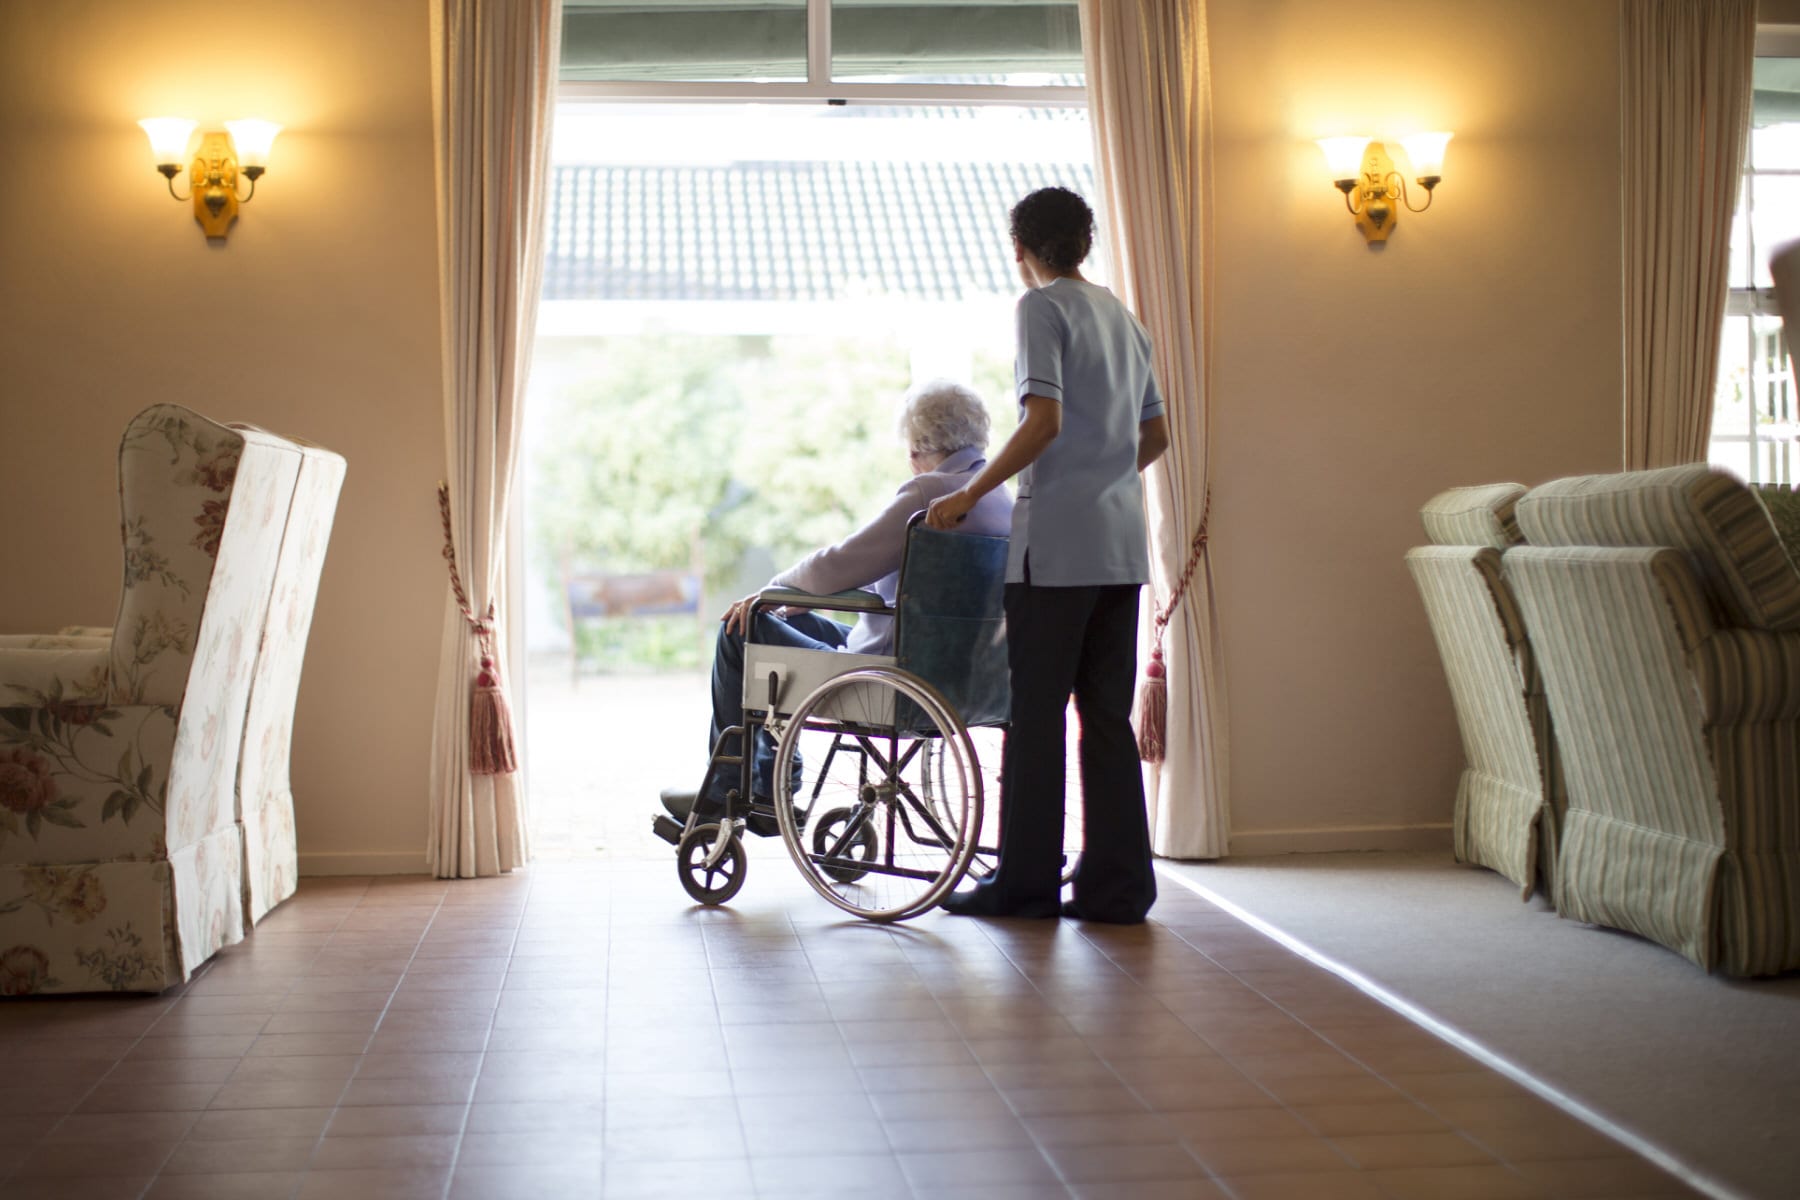 Only 1 in 4 nursing homes are confident they can survive a year image pic